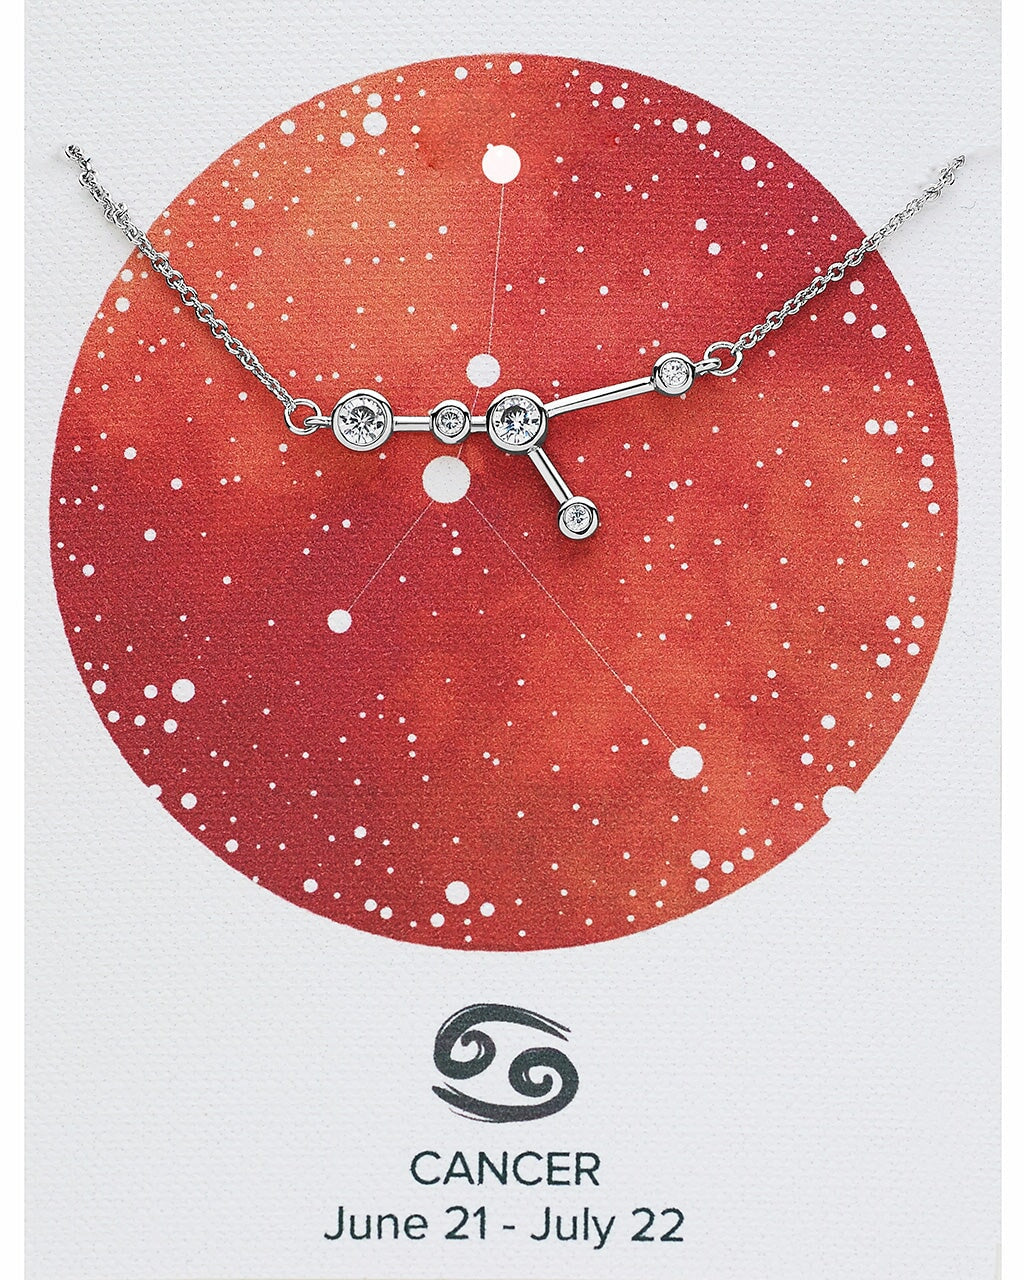 'When Stars Align' Constellation Necklace Necklace Sterling Forever 